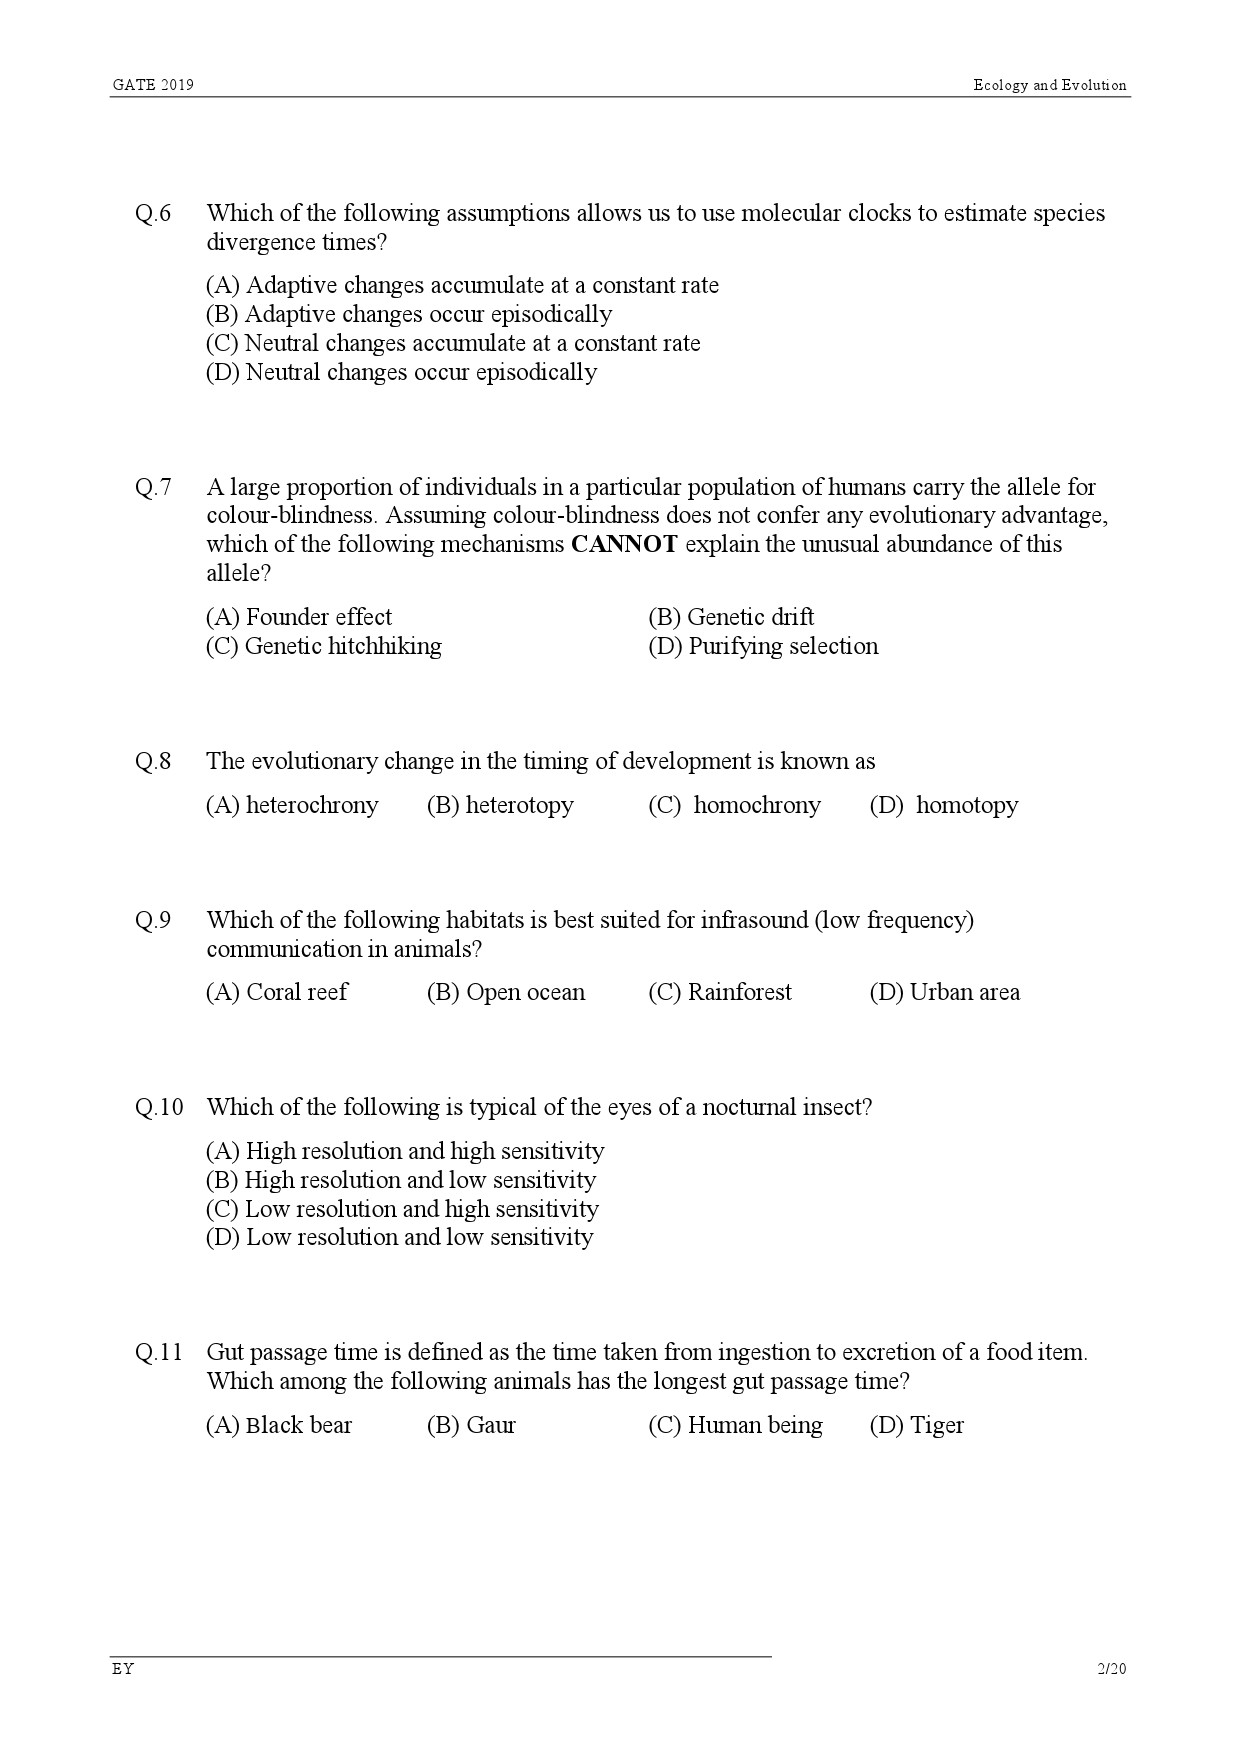 GATE Exam Question Paper 2019 Ecology and Evolution 5